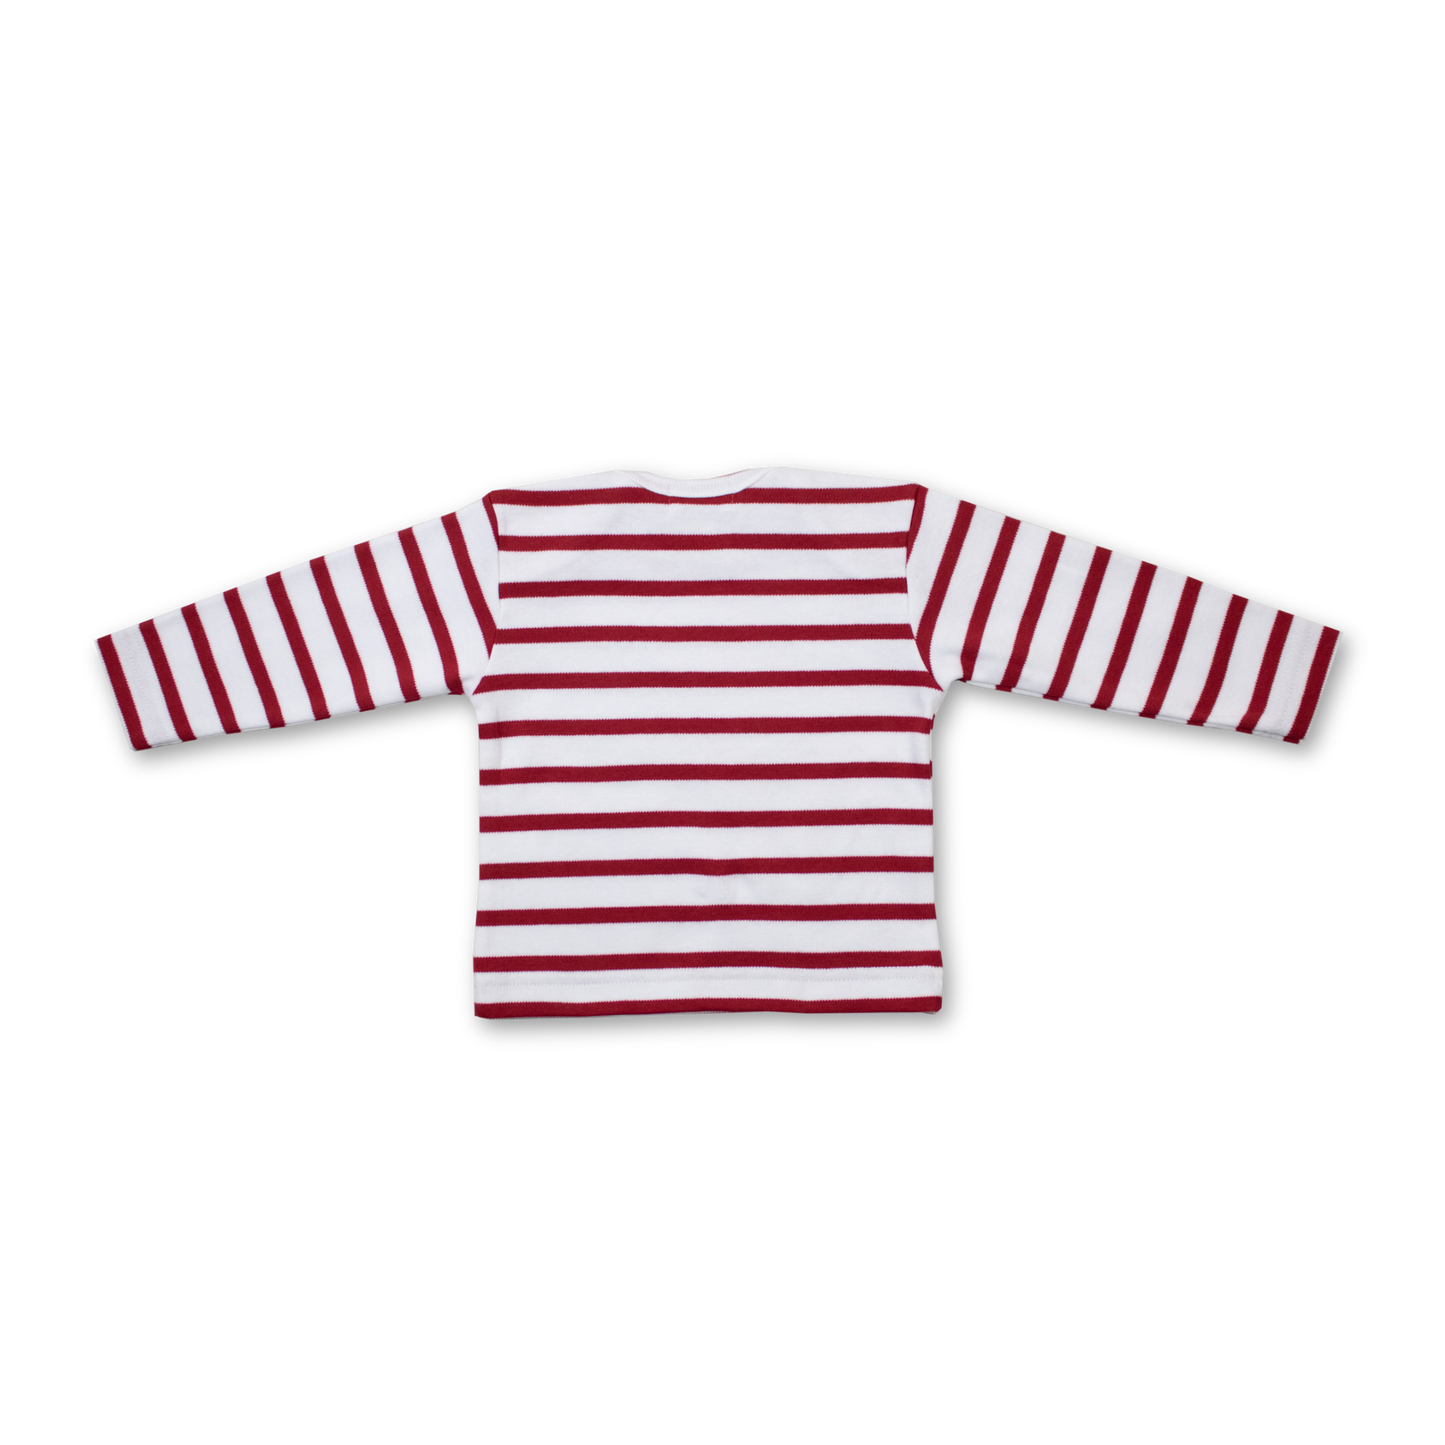 Babies long sleeve top - Red/White - Chilly the Penguin